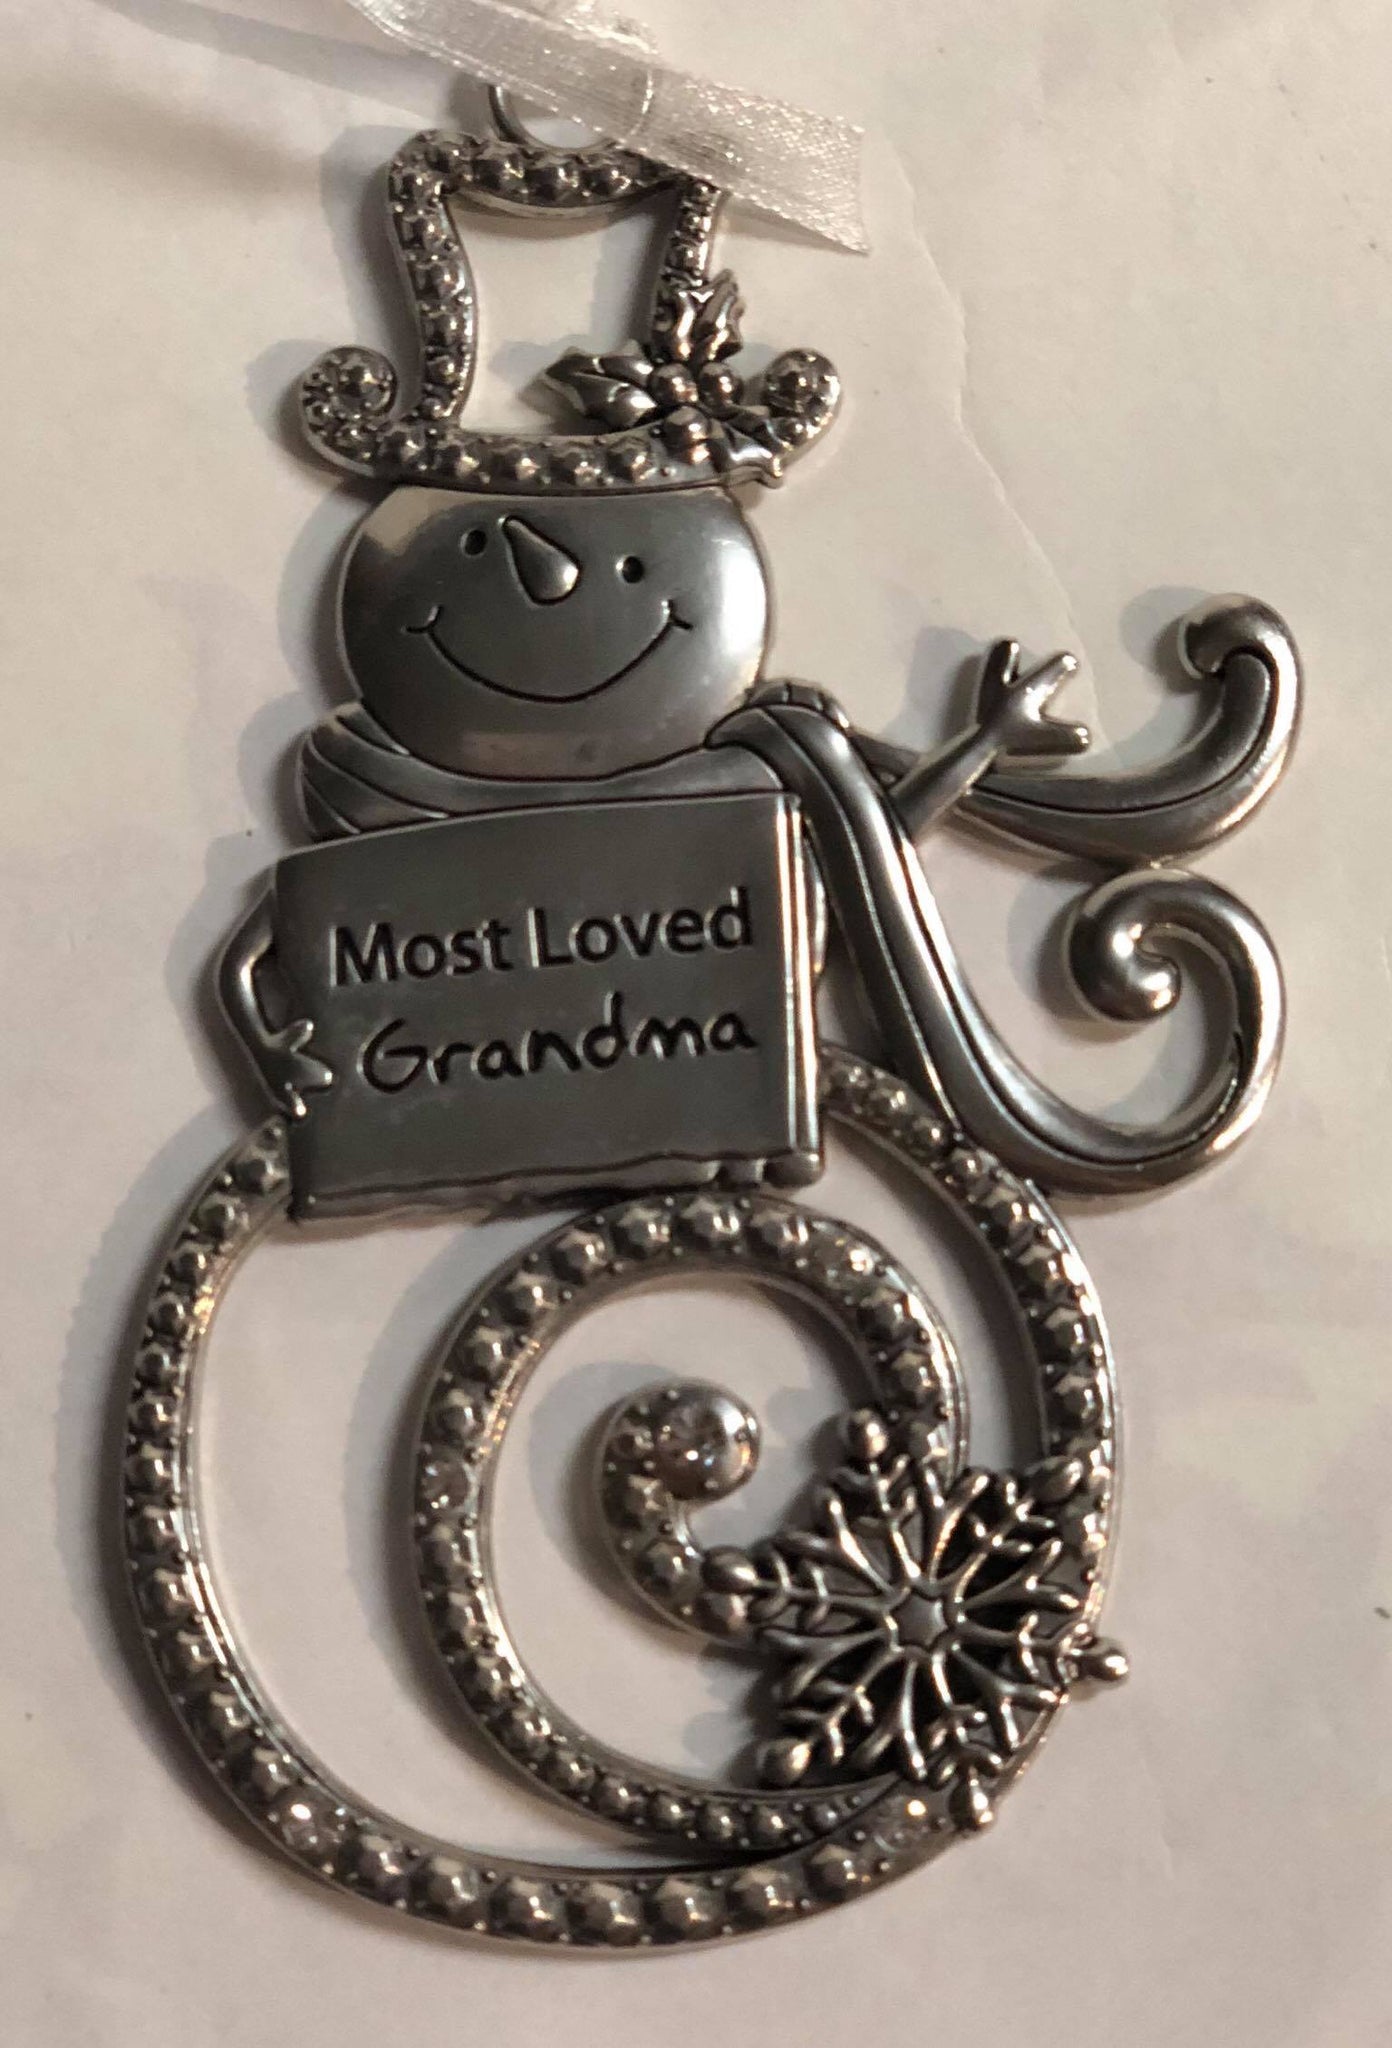 Snowman with sign Tree Ornament "Most Loved Grandma"